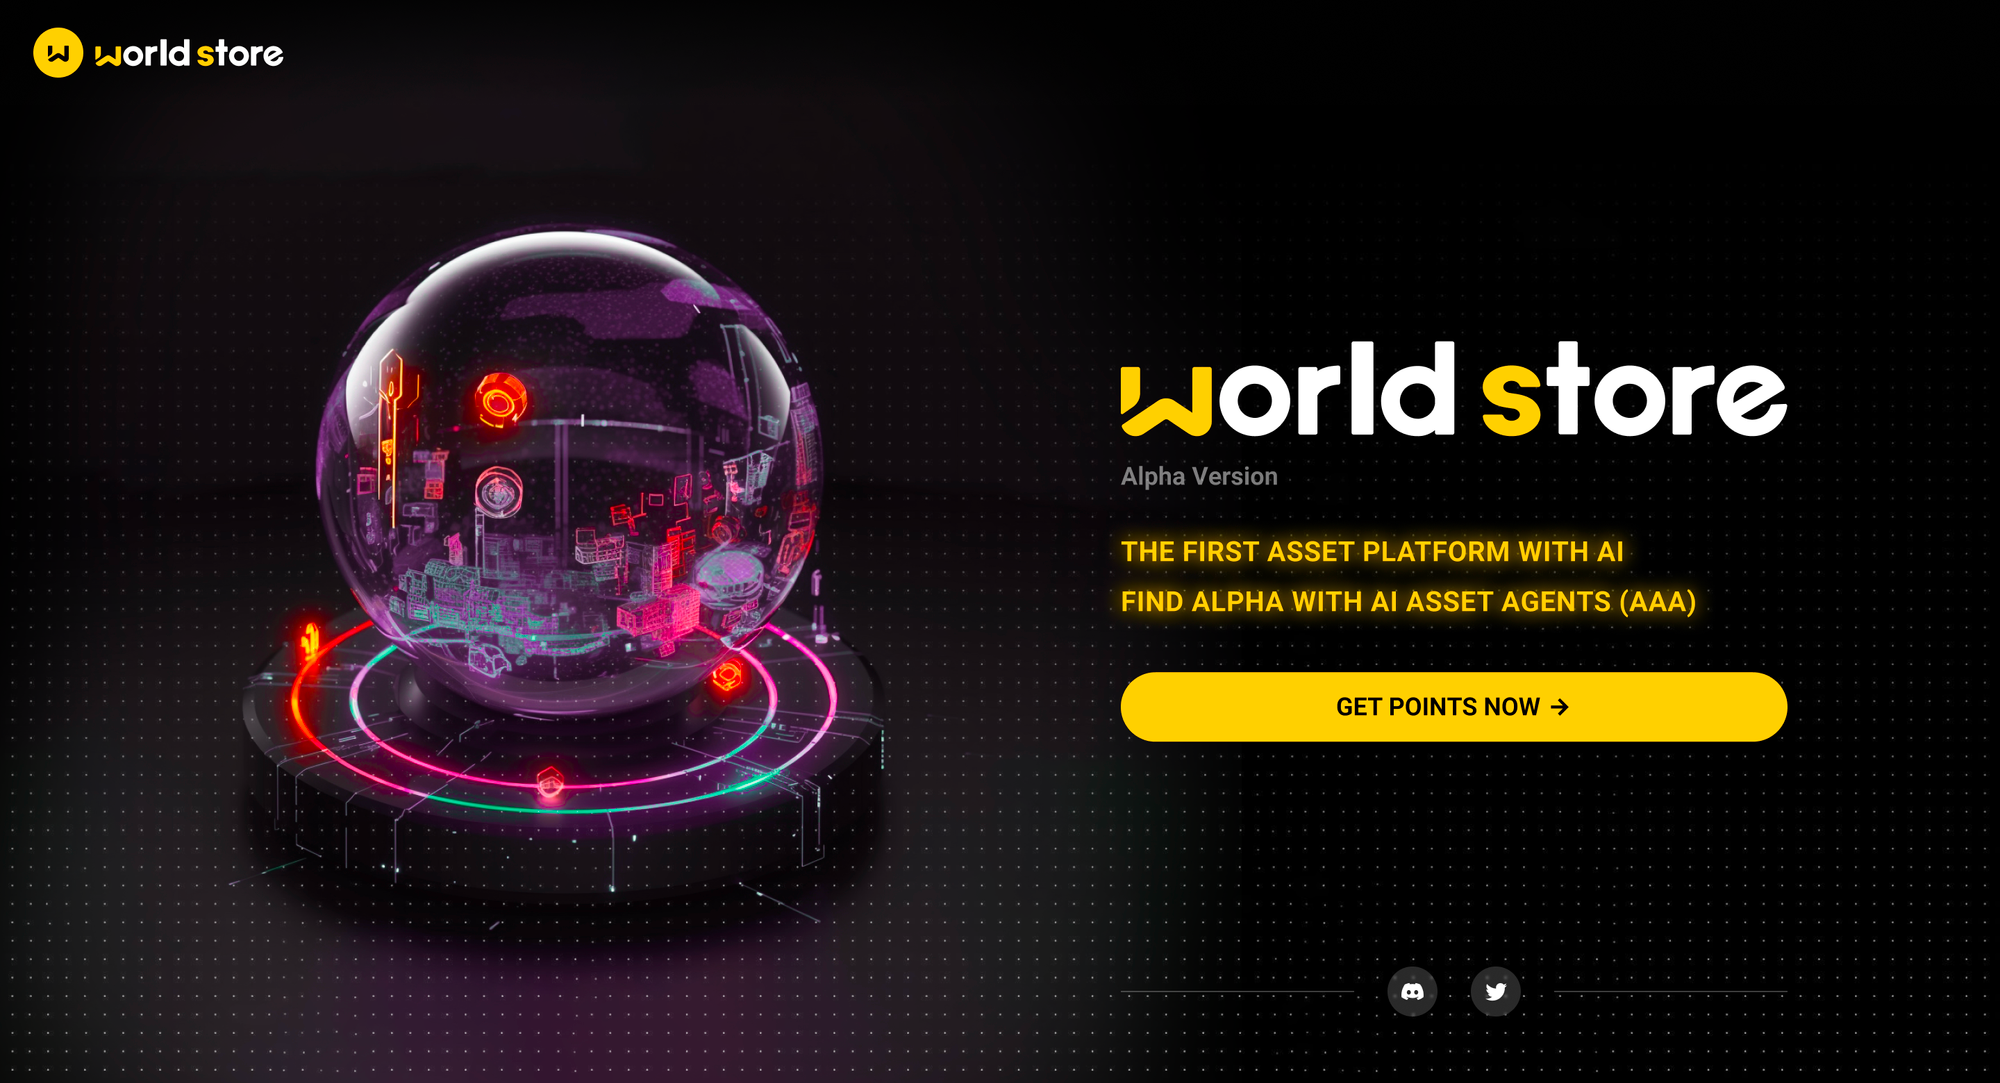 How Mirror World Found Alpha By Leveraging AI Asset Agents (AAA)?